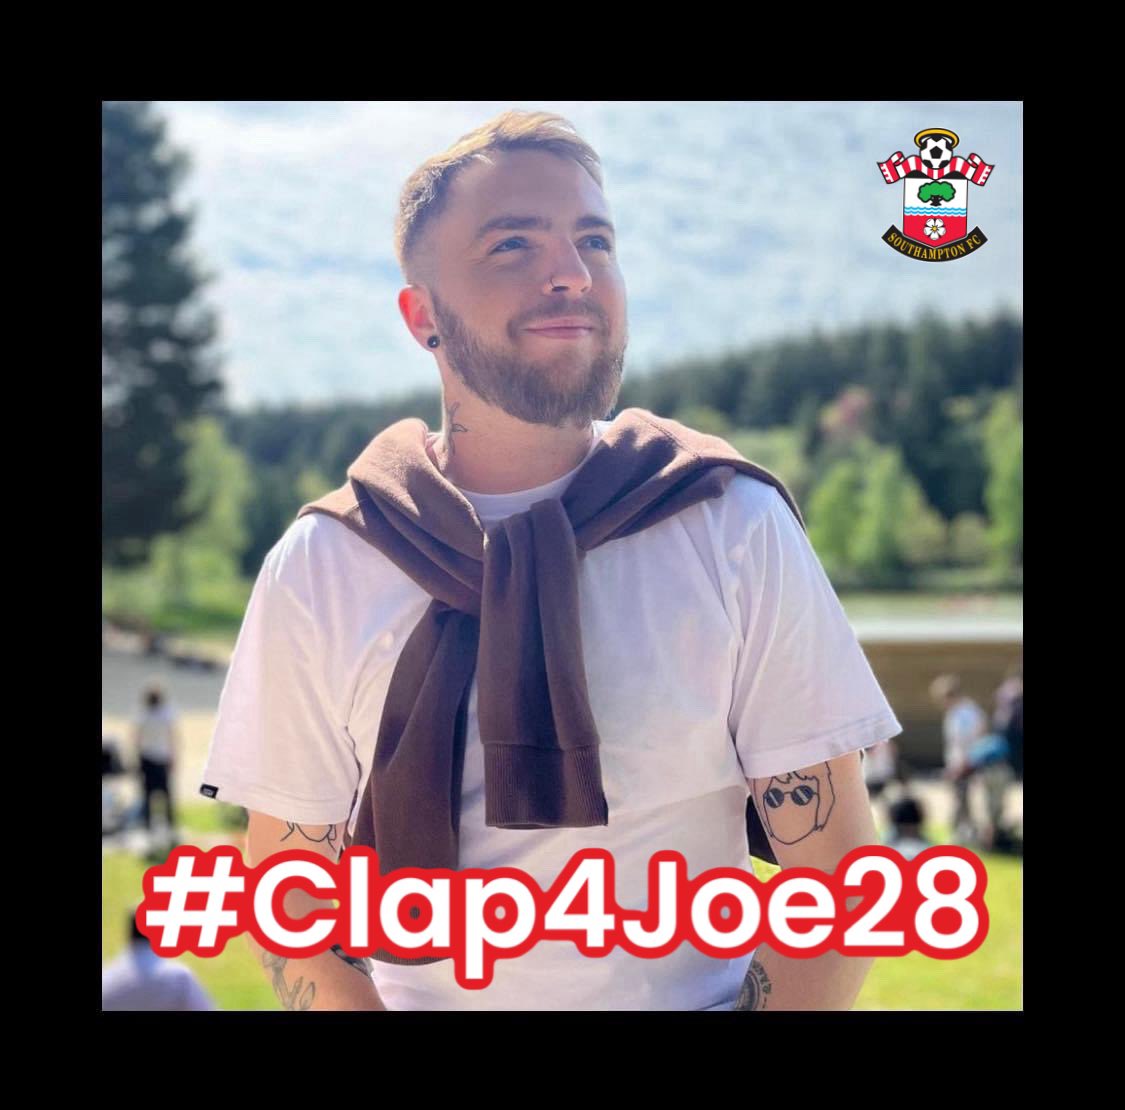 #saintsfc #Clap4Joe28 Please can we all pay tribute to one of our own. Cruelly taken away from us far too early. A massive Saints fan, singer song writer. A beloved, son, uncle and friend. A minutes applause on 28th minute against @pnefc would be a fitting tribute for Joe.